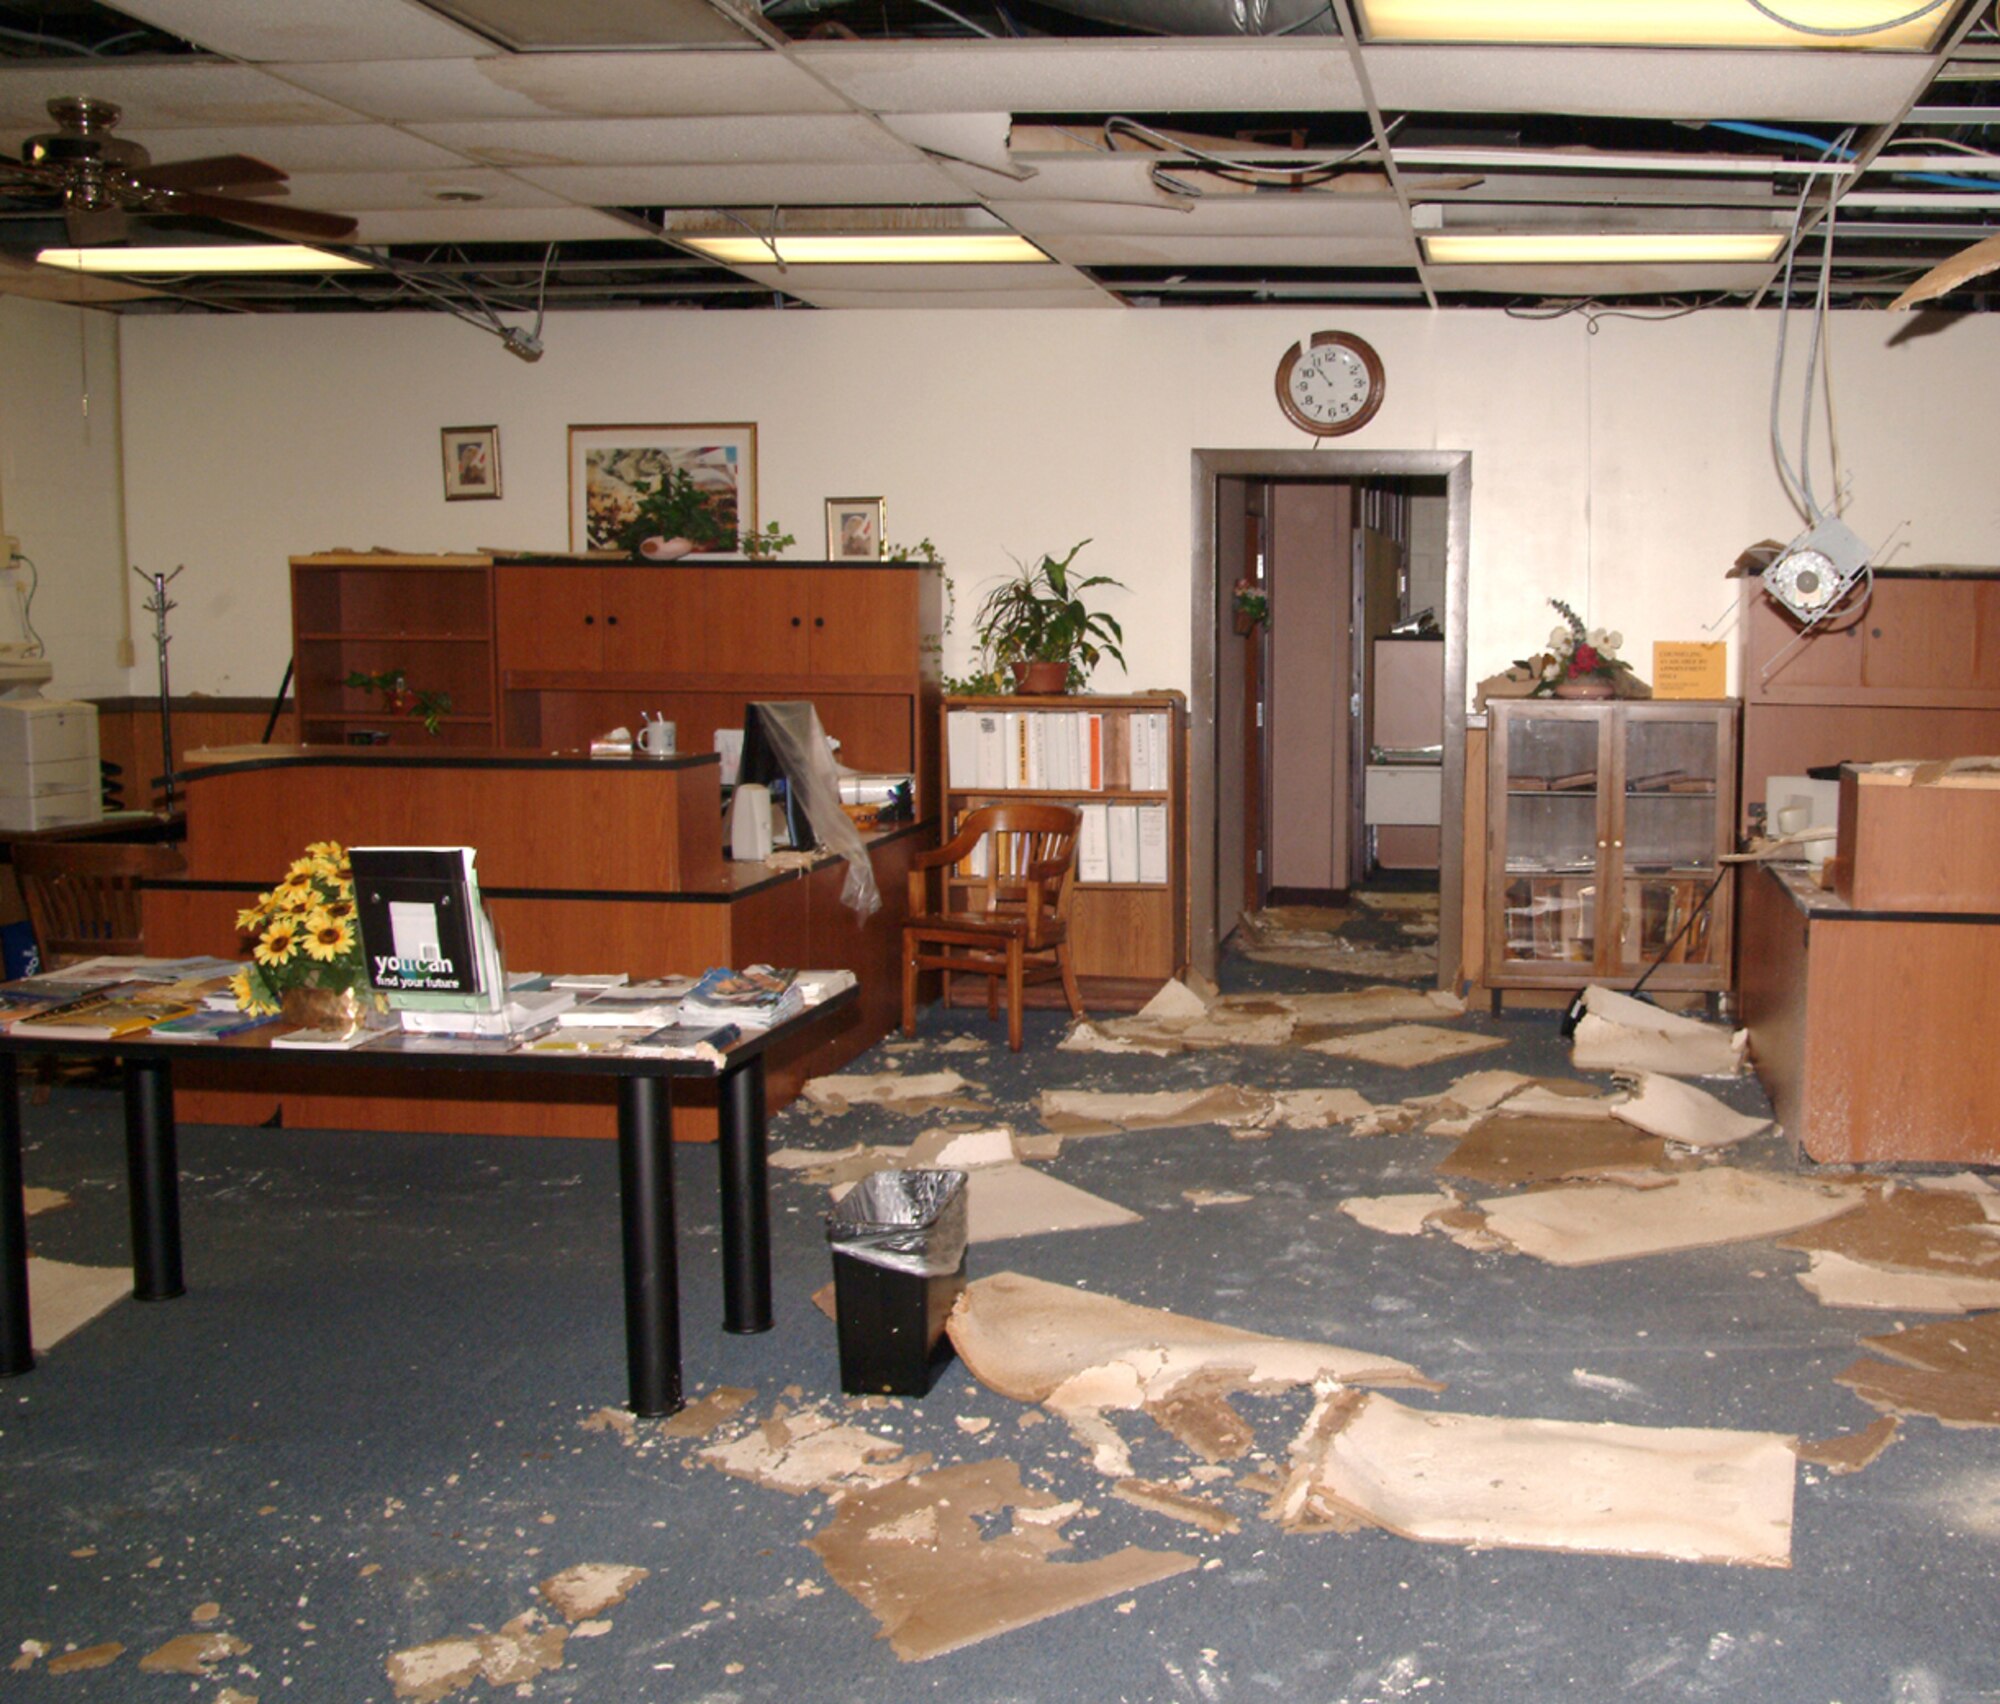 Sablich Center, the heart of base support activities, was uninhabitable after storm water intrusion from the roof and windows.  Offices and agencies have been scattered at several locations while a $6.2 million project repairs the facility.  (U.S. Air Force photo)